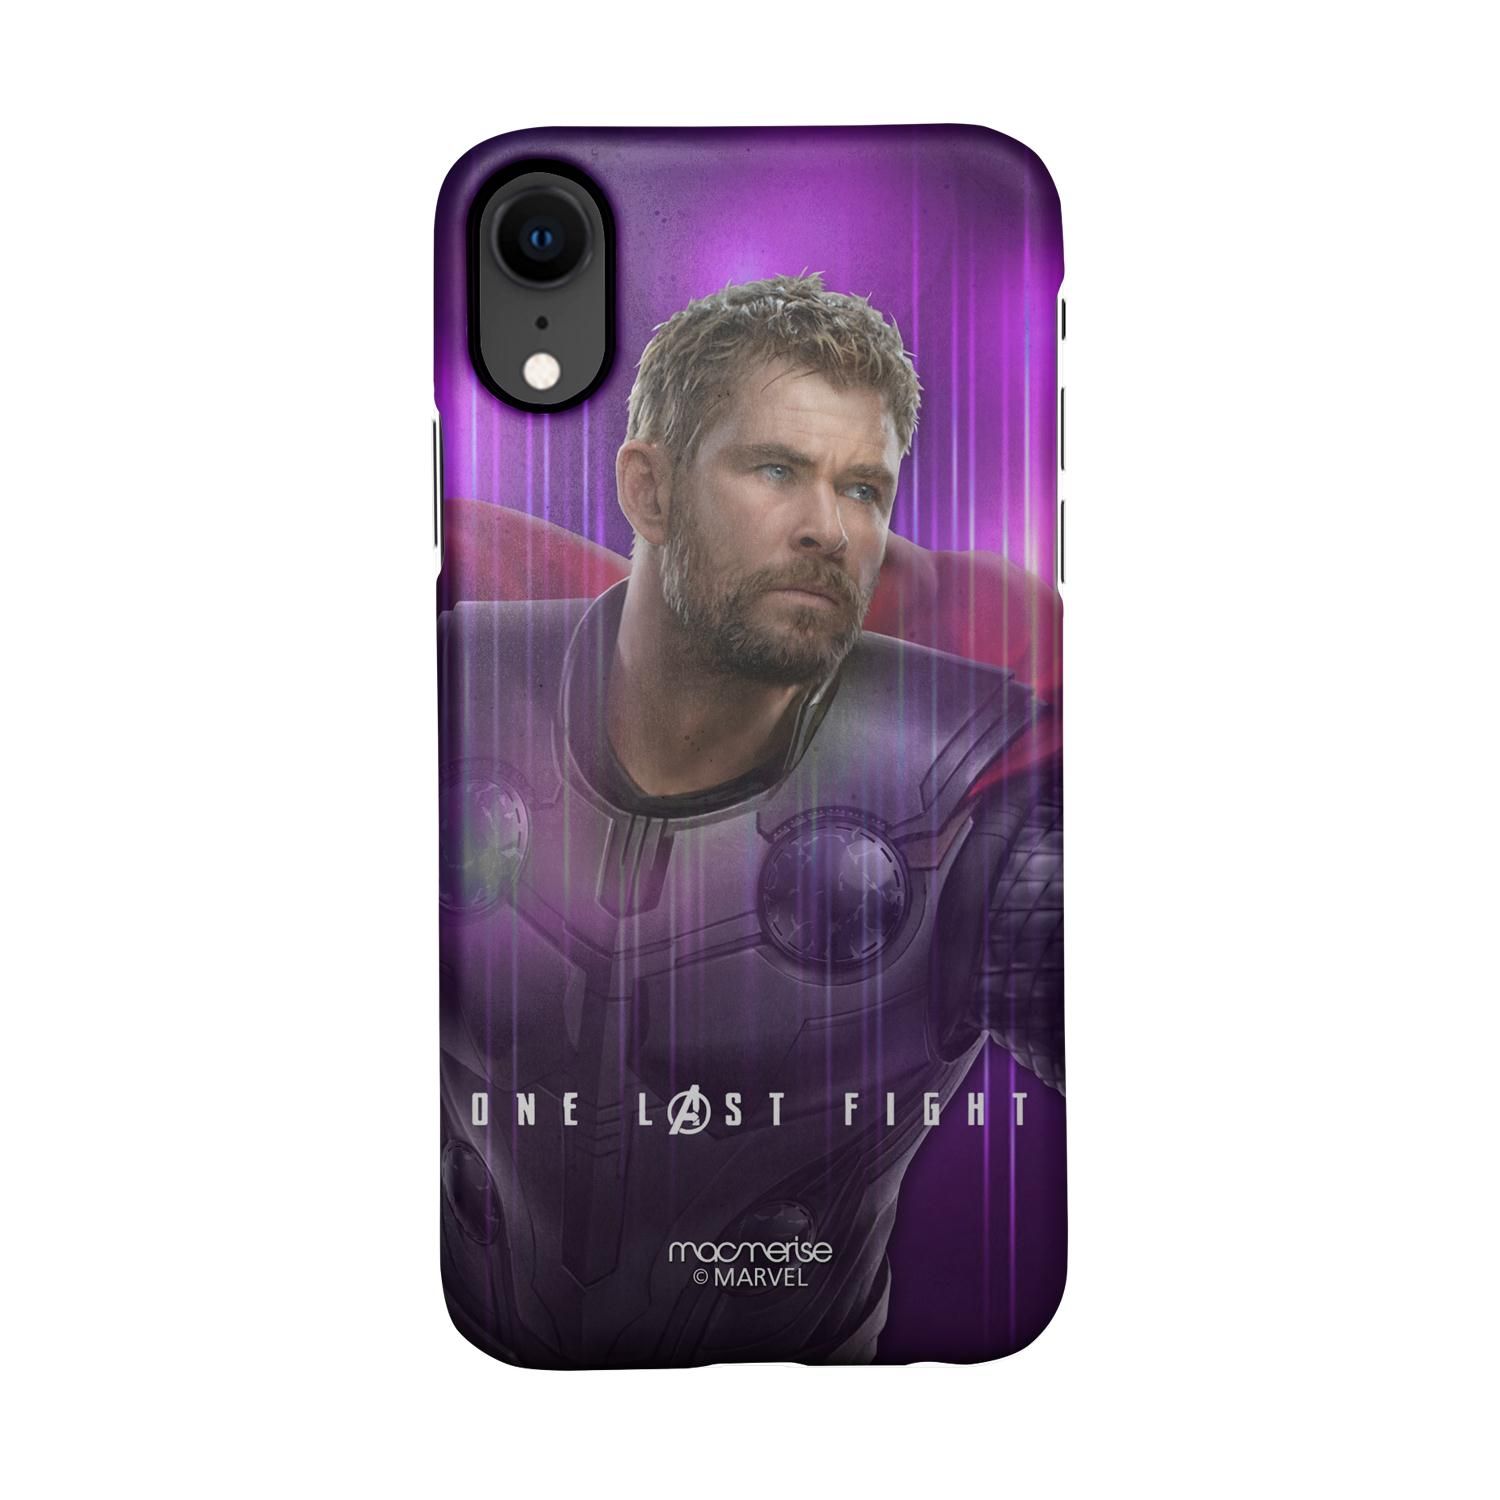 Buy One Last Fight - Sleek Phone Case for iPhone XR Online